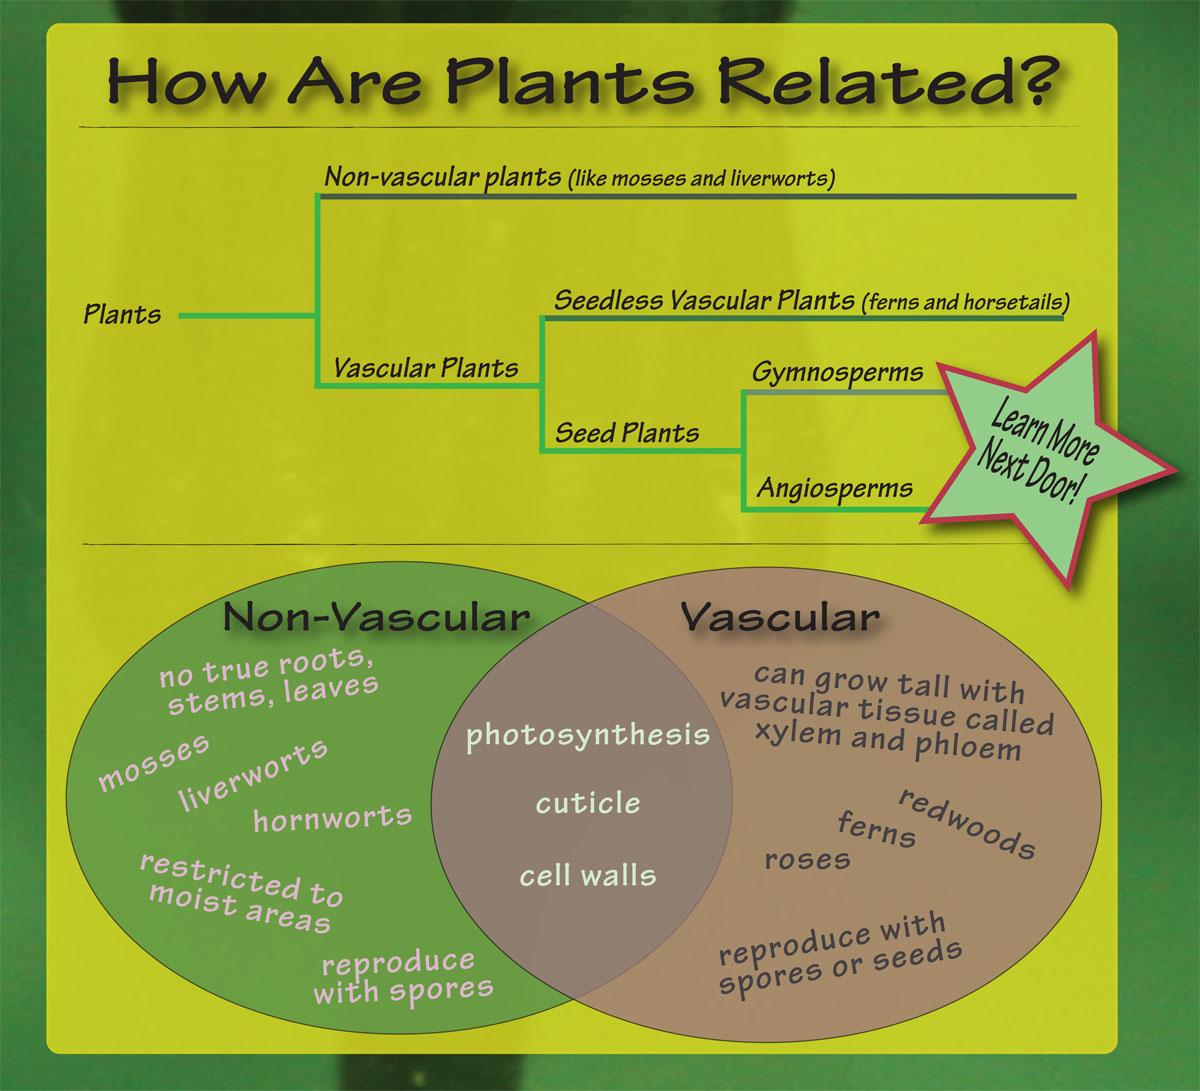 How are plants related. Vascular & non vascular plants share the characteristics of photosynthesis, cuticle, and cell walls. 